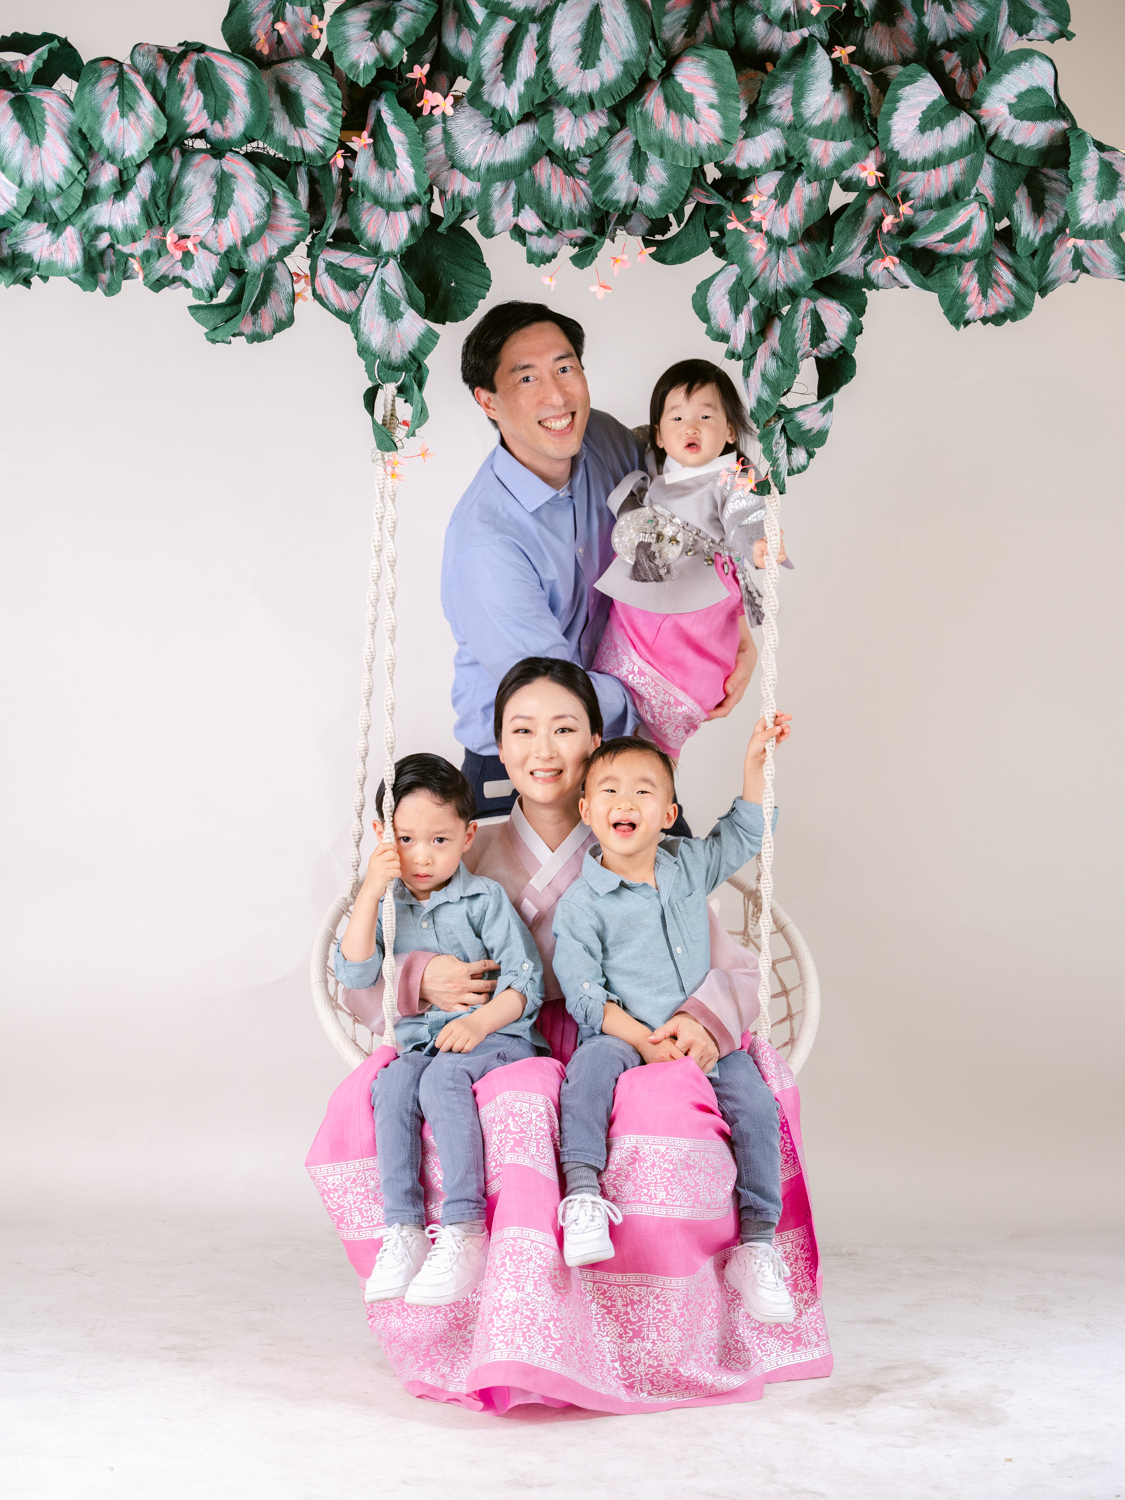 Hanbok Family Portraits in Los Angeles